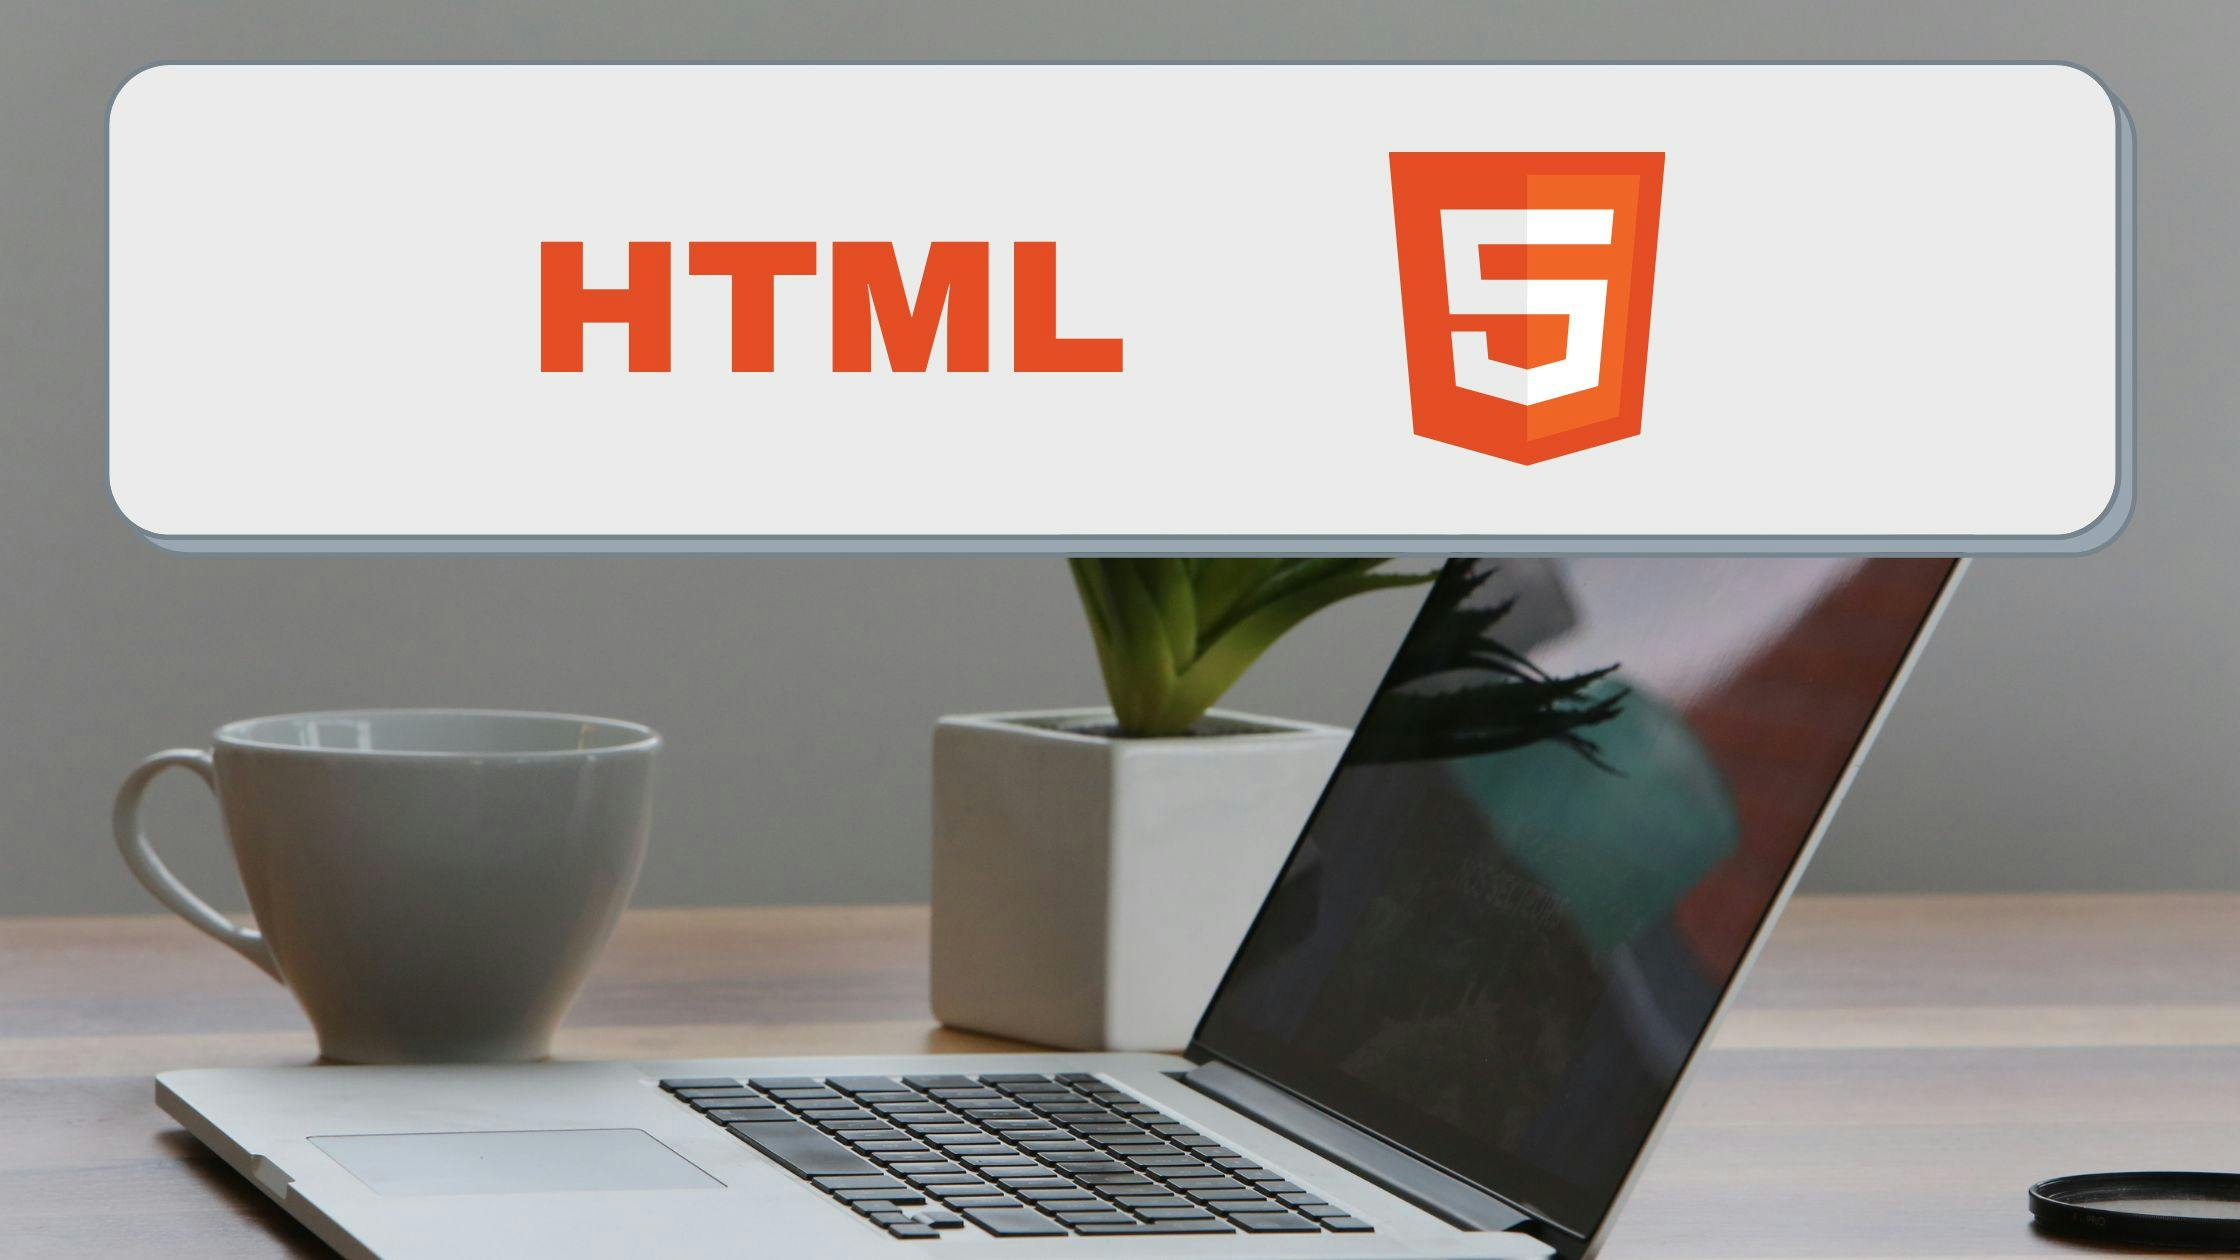 /9-tips-and-best-practices-for-html-5-c01137w7 feature image